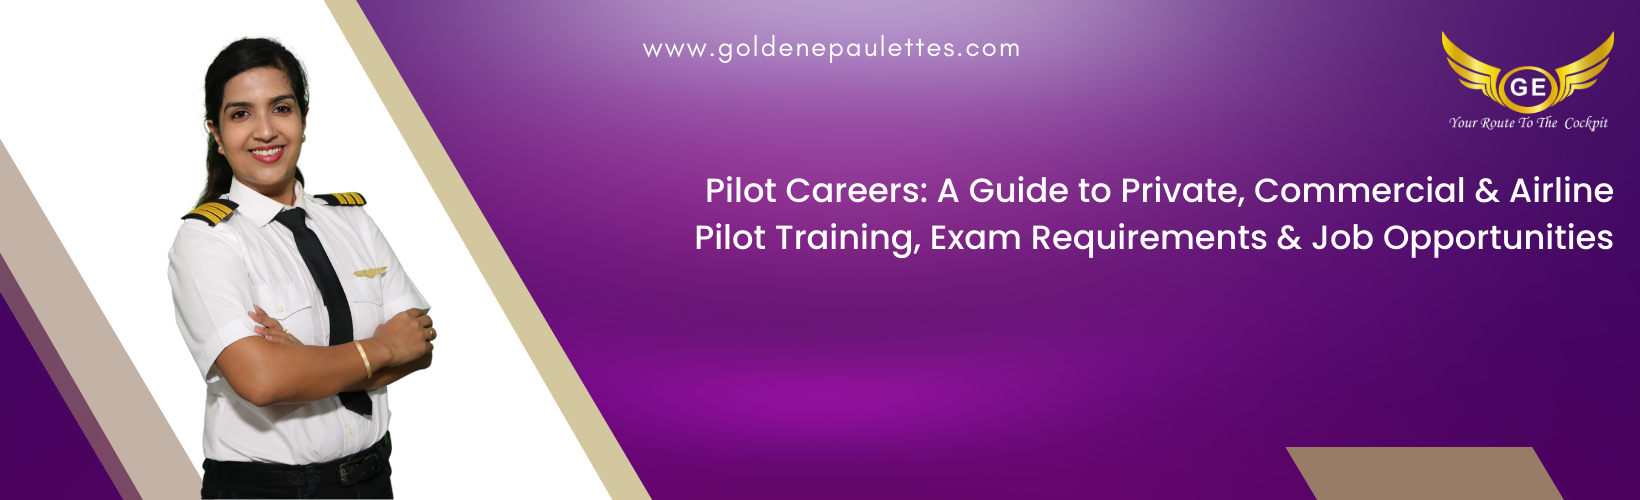 What You Need to Know About Pilot Careers